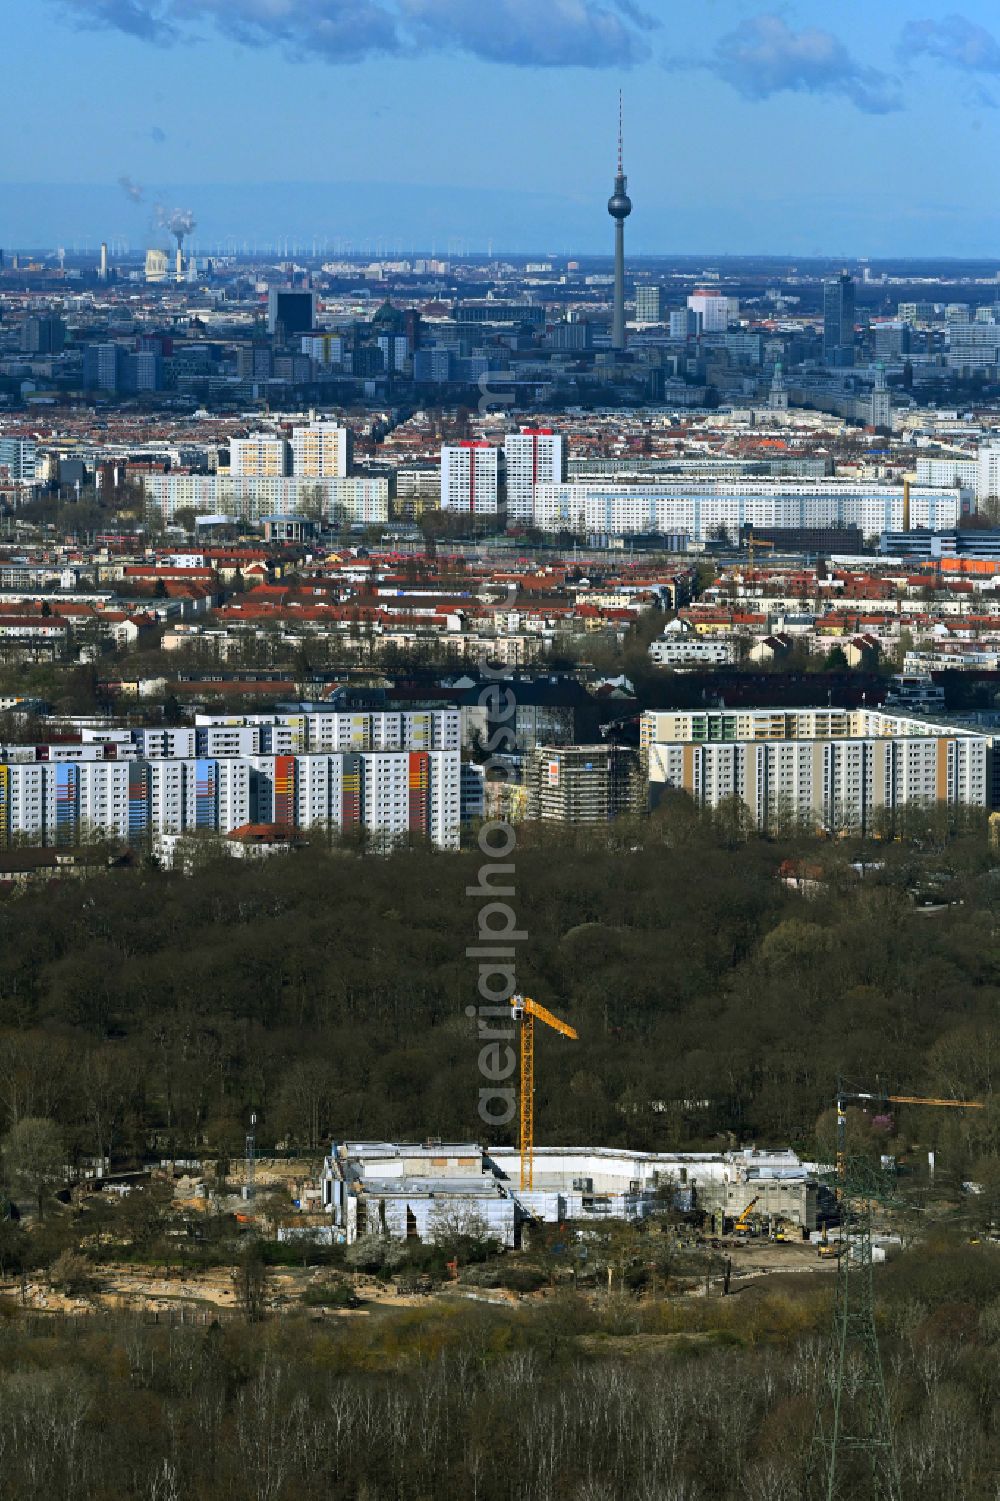 Berlin from above - Construction site for reconstruction and modernization and renovation of a building Pachyderm house in the zoo on street Am Tierpark in the district Friedrichsfelde in Berlin, Germany